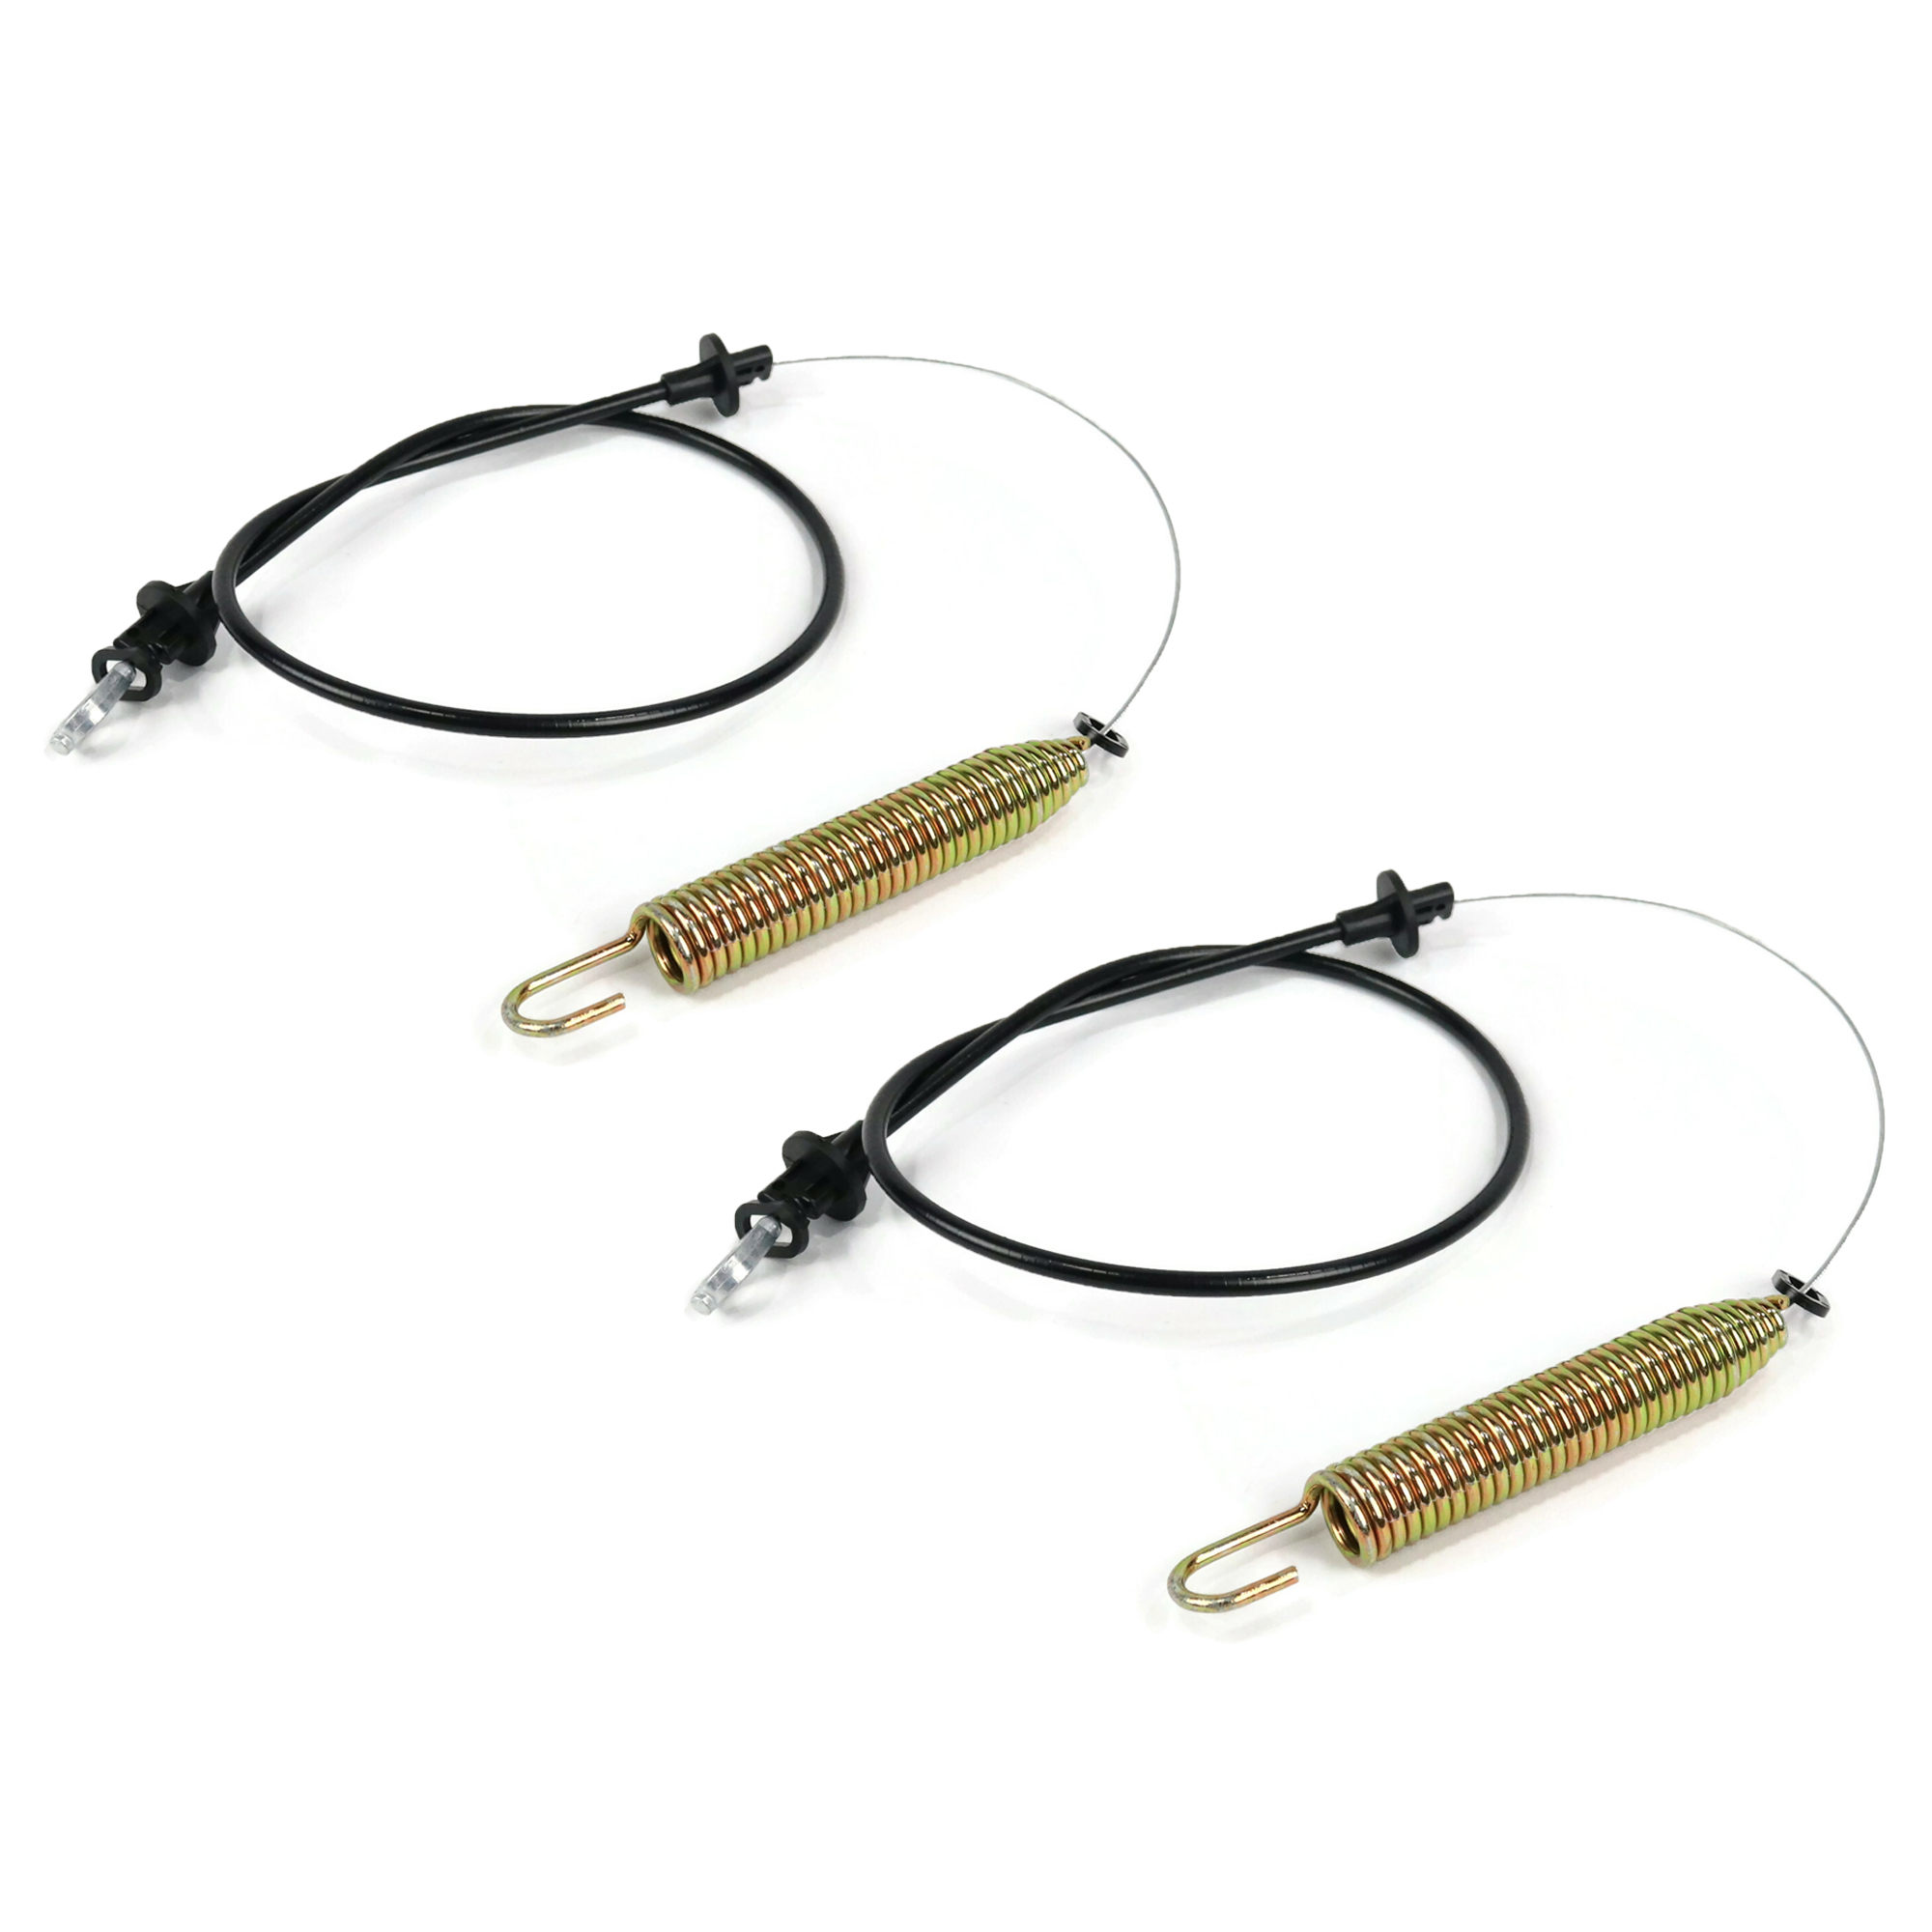 The ROP Shop | (2) Deck Engagement Clutch Cables for MTD LT942G LT942H 600 Series Lawn Tractors - image 1 of 9